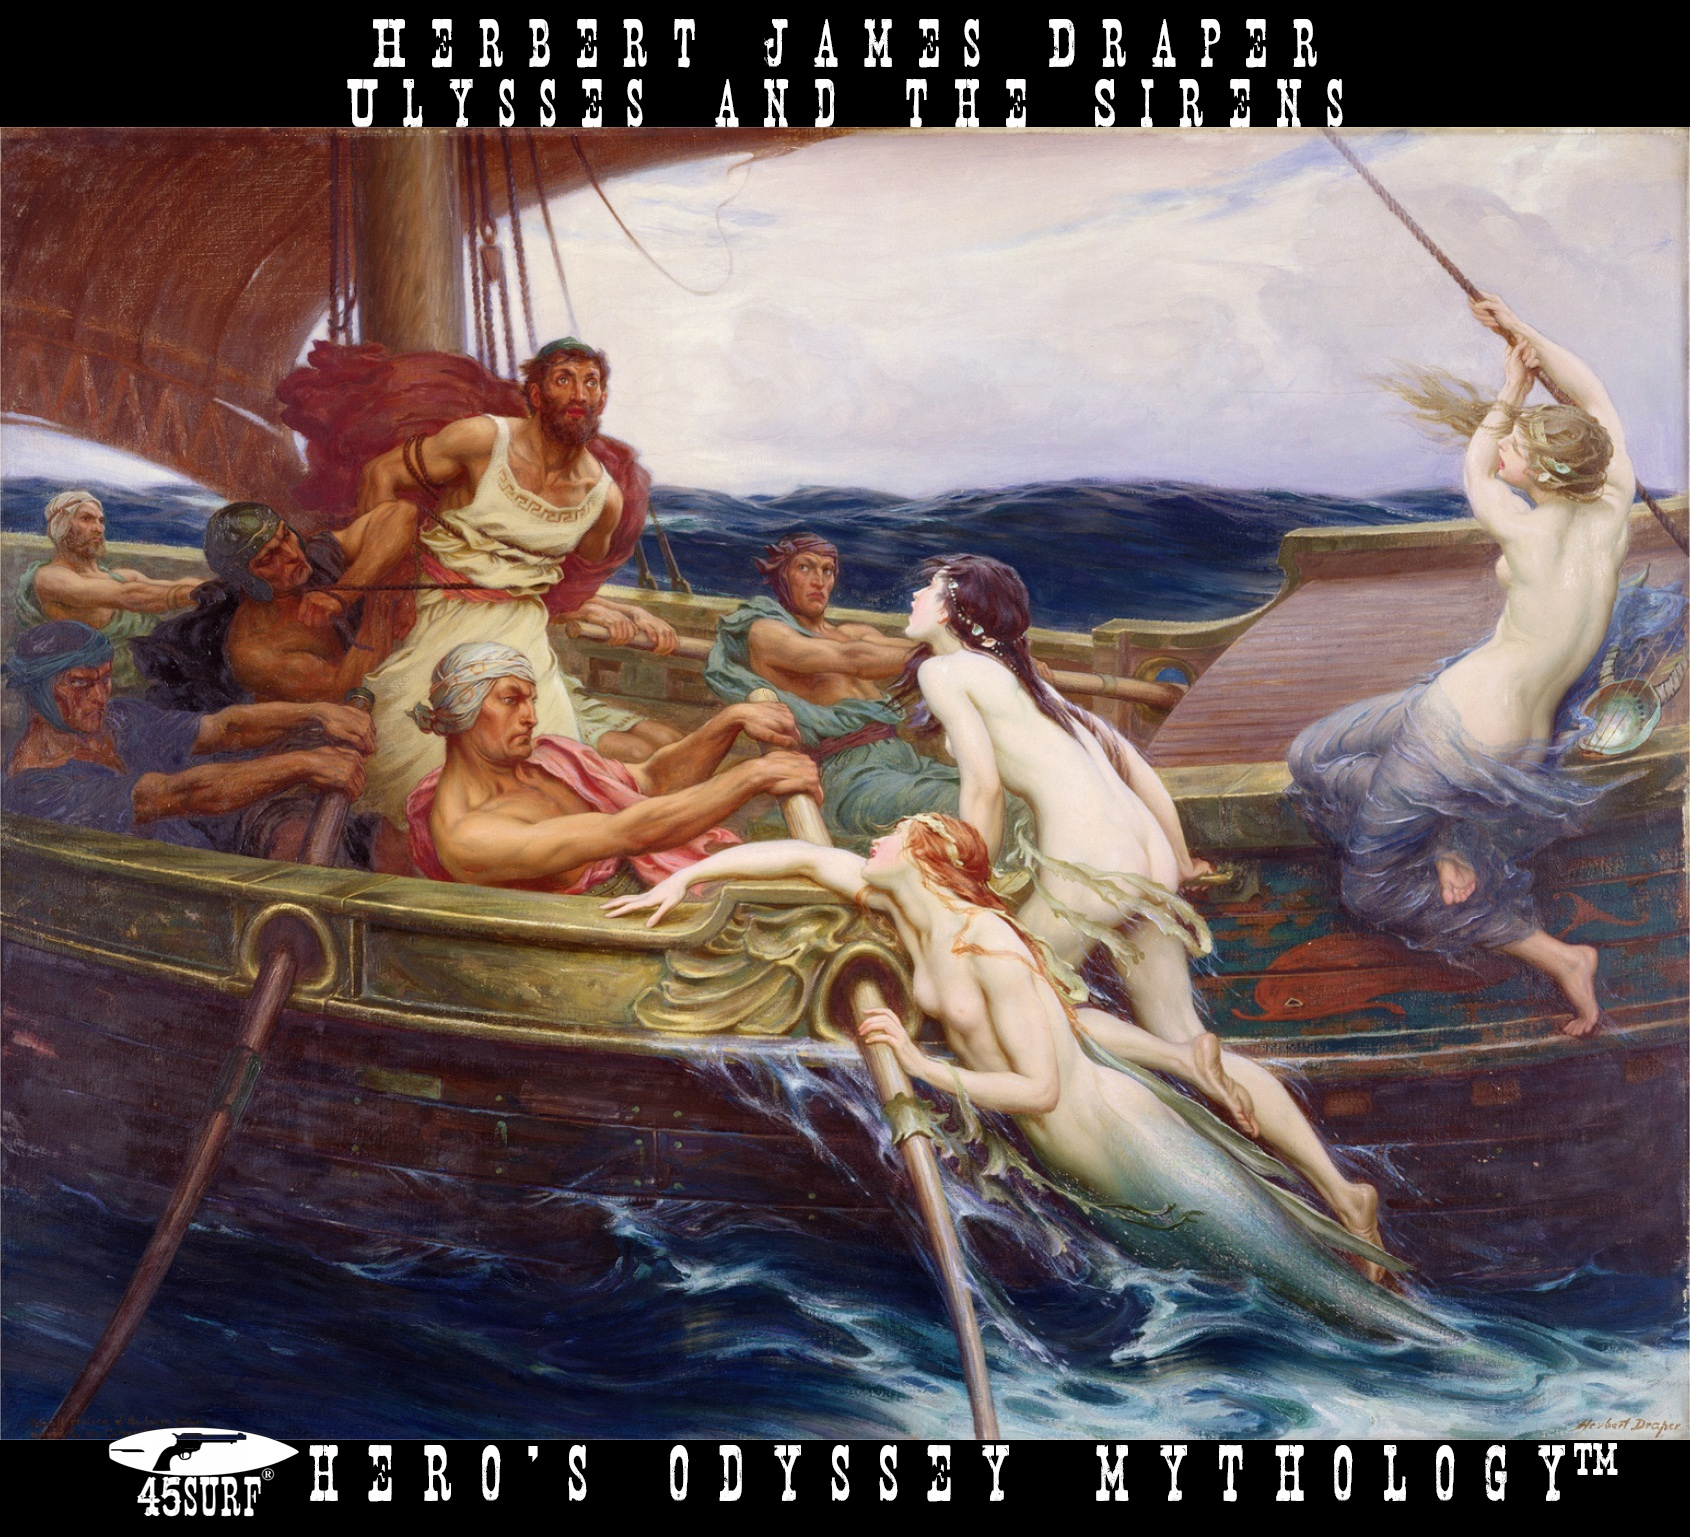 ulysses and the sirens 2.jpg